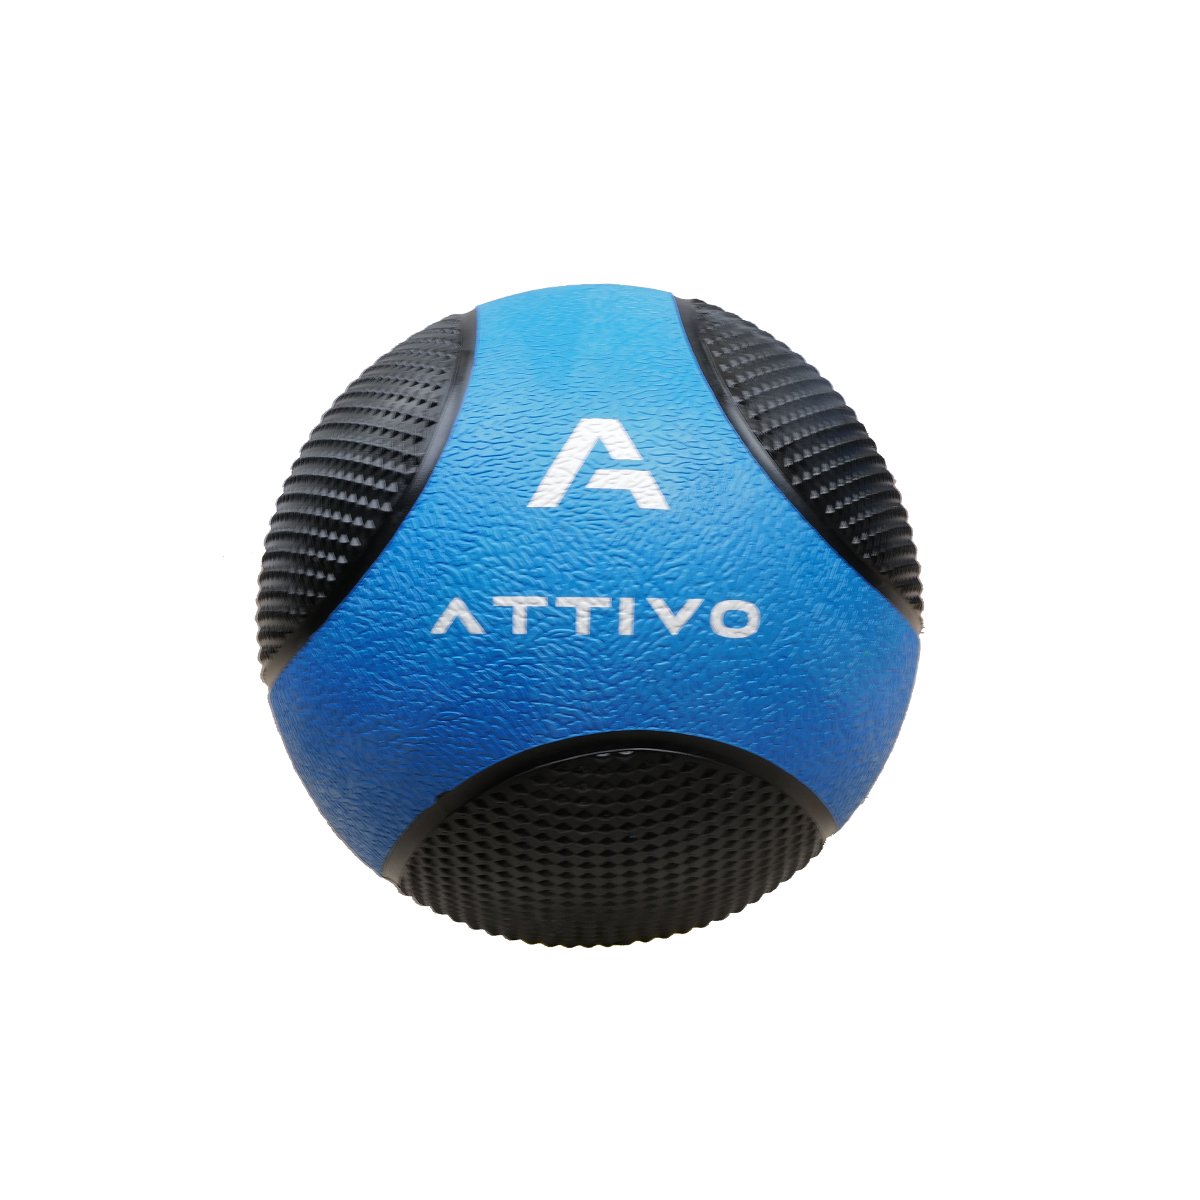 ATTIVO Medicine Ball for Workouts Exercise Balance Training - 7KG